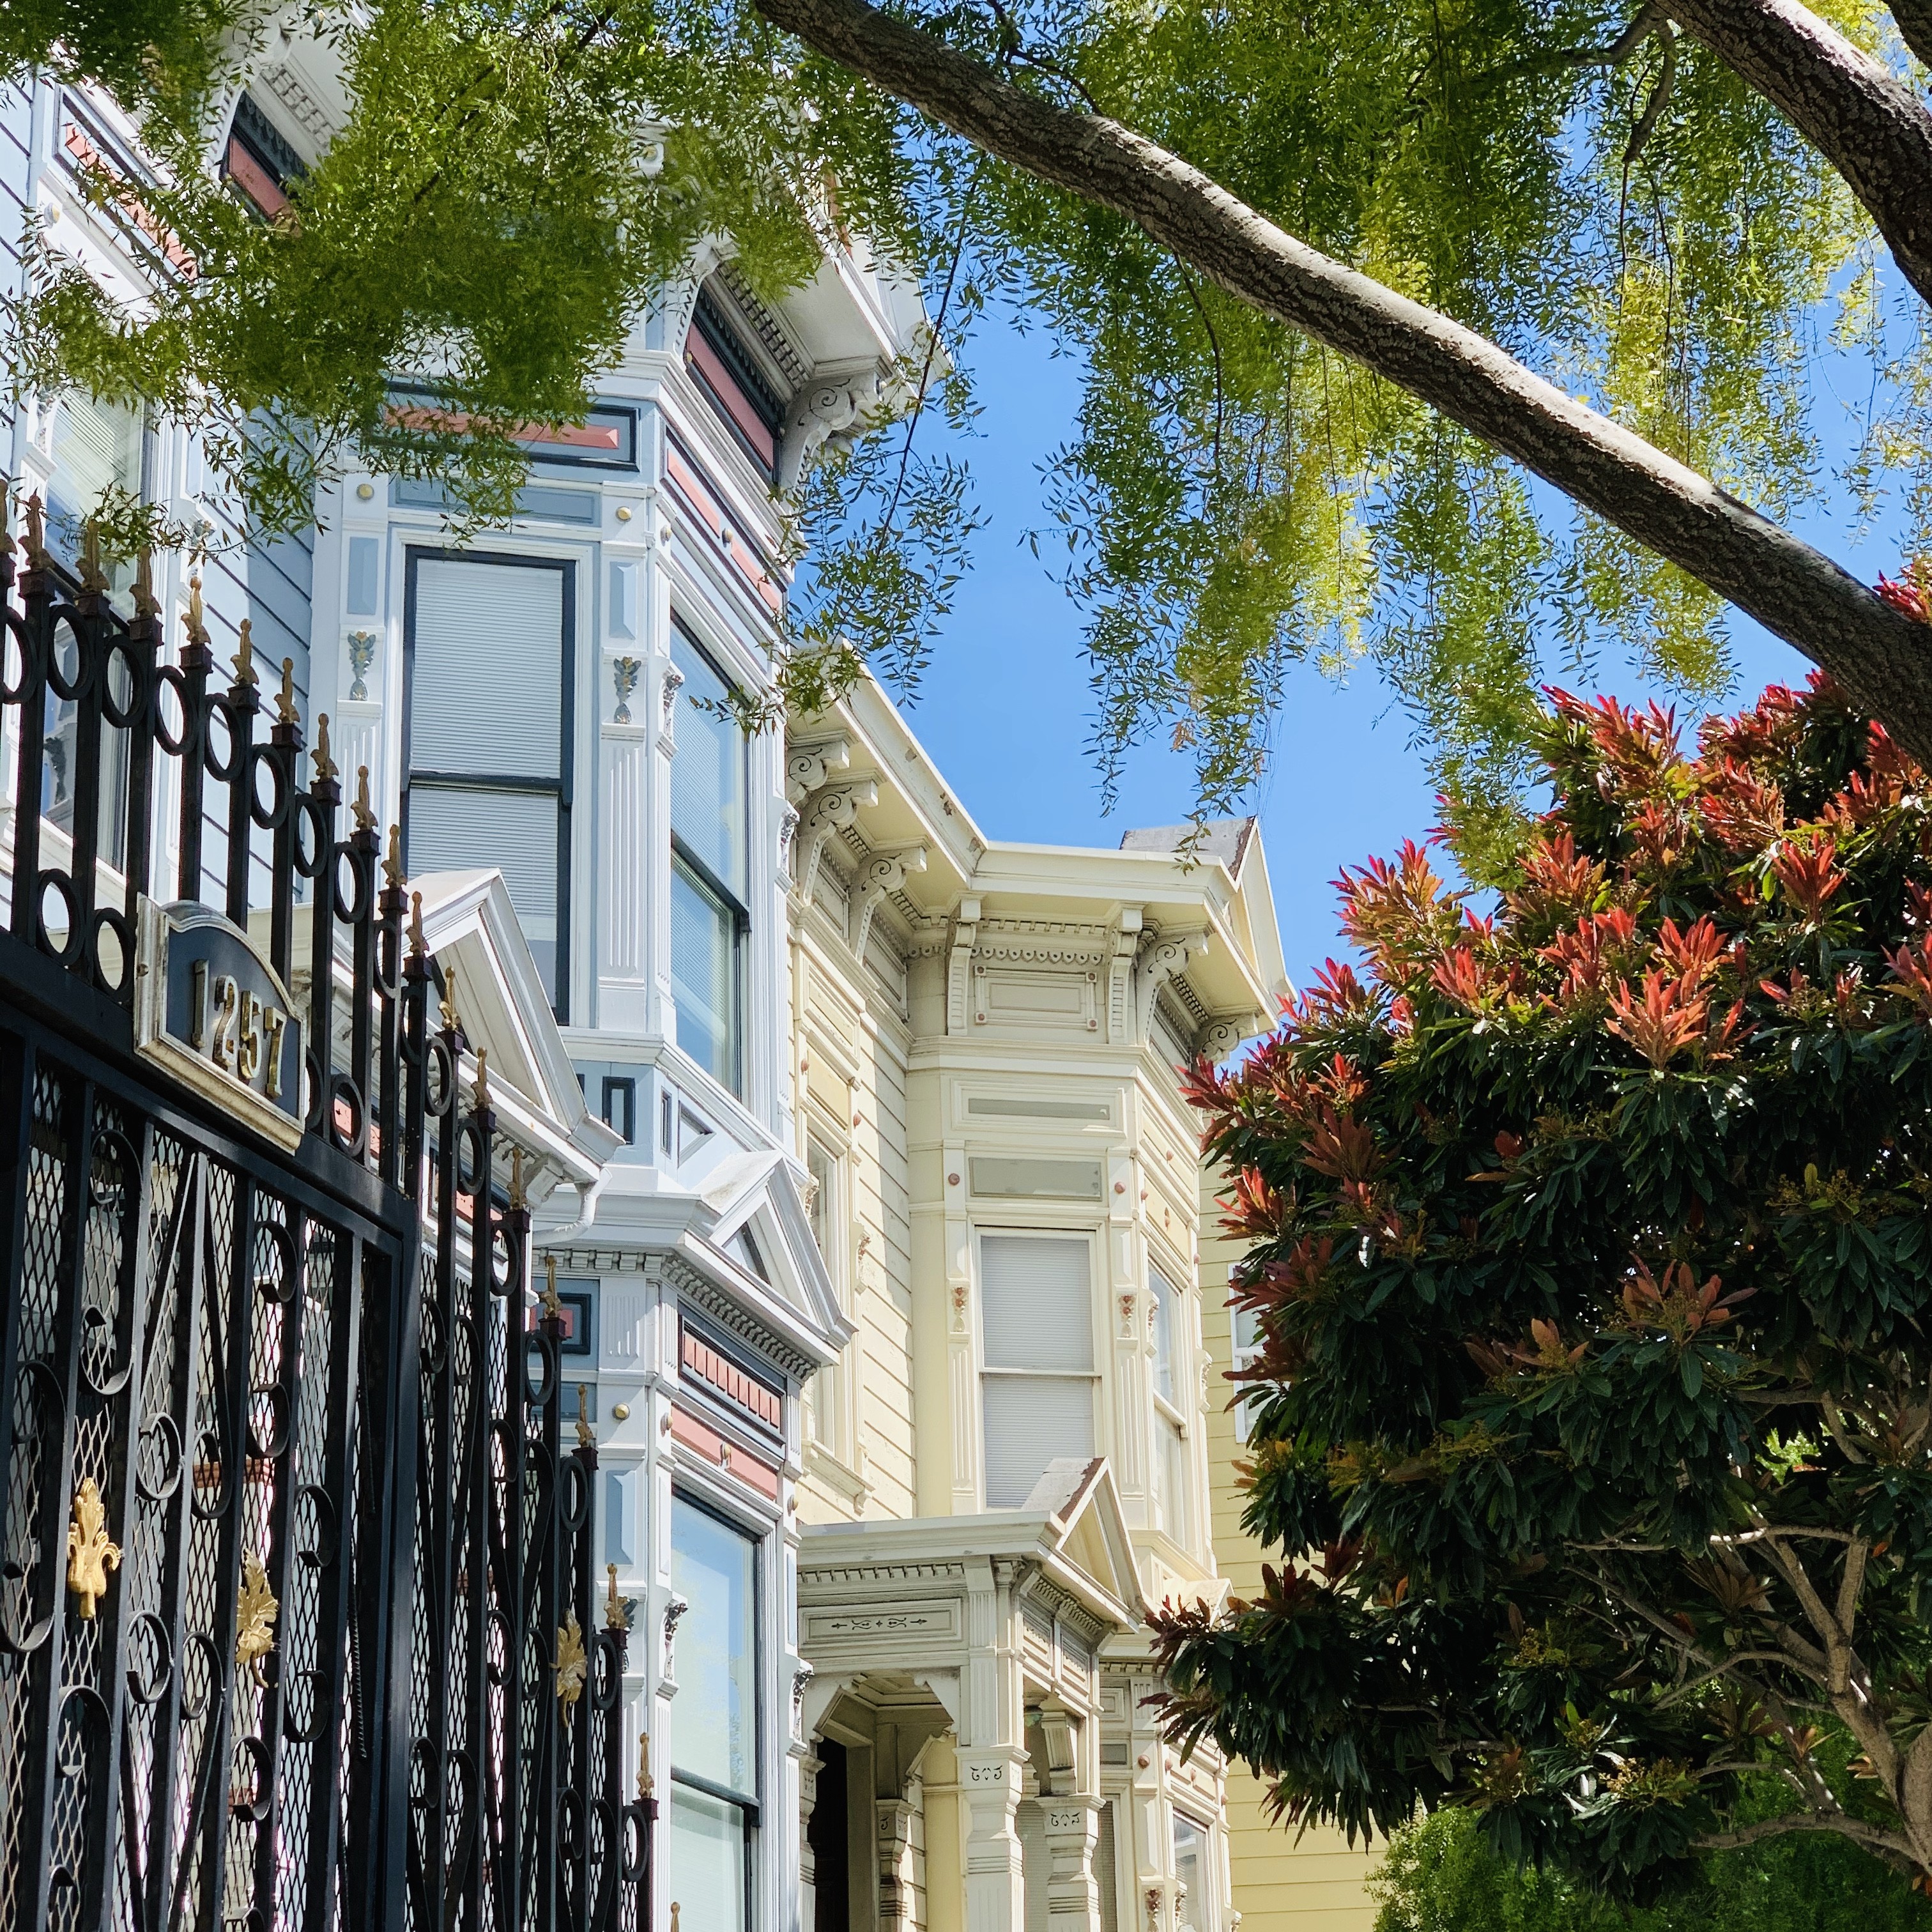 Looking up at Victorian style houses with trees lining the street.